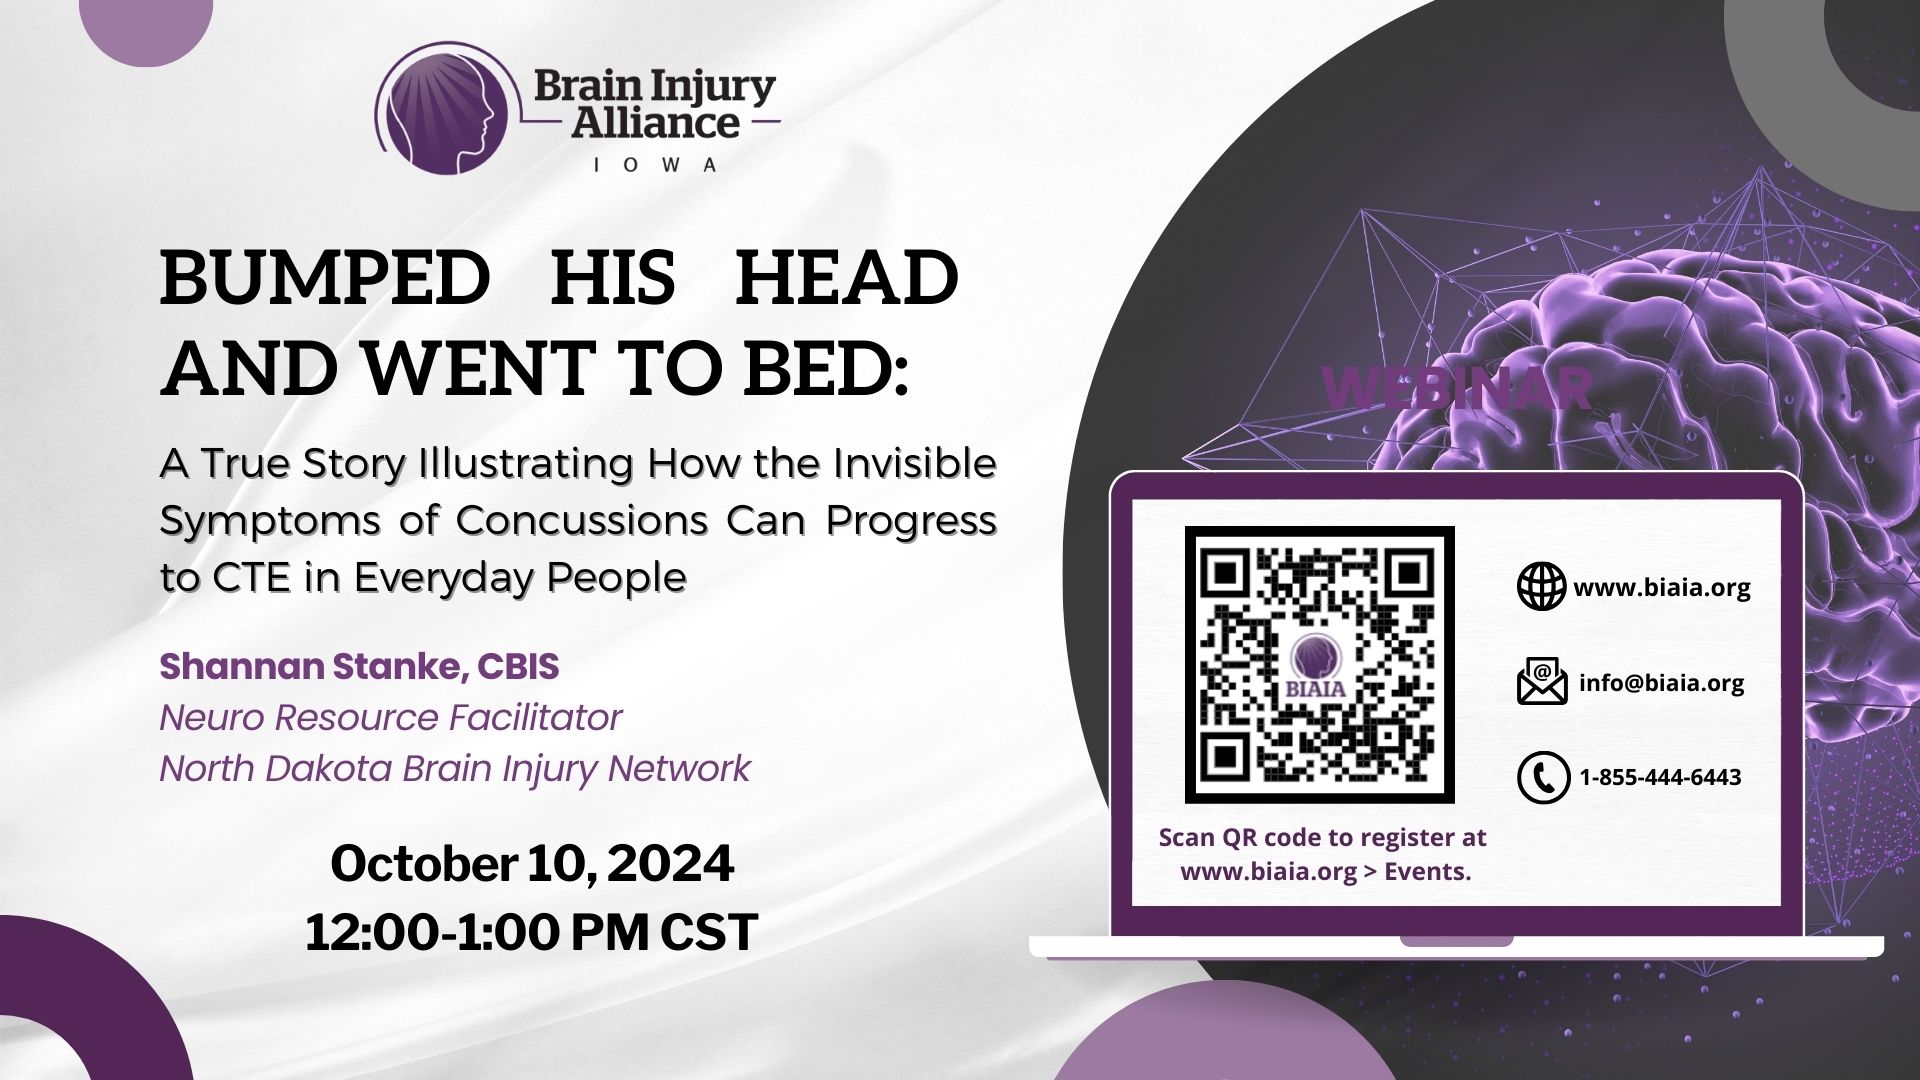 Bumped His Head and Went to Bed: A True Story Illustrating How the Invisible Symptoms of Concussions Can Progress to CTE in Everyday People